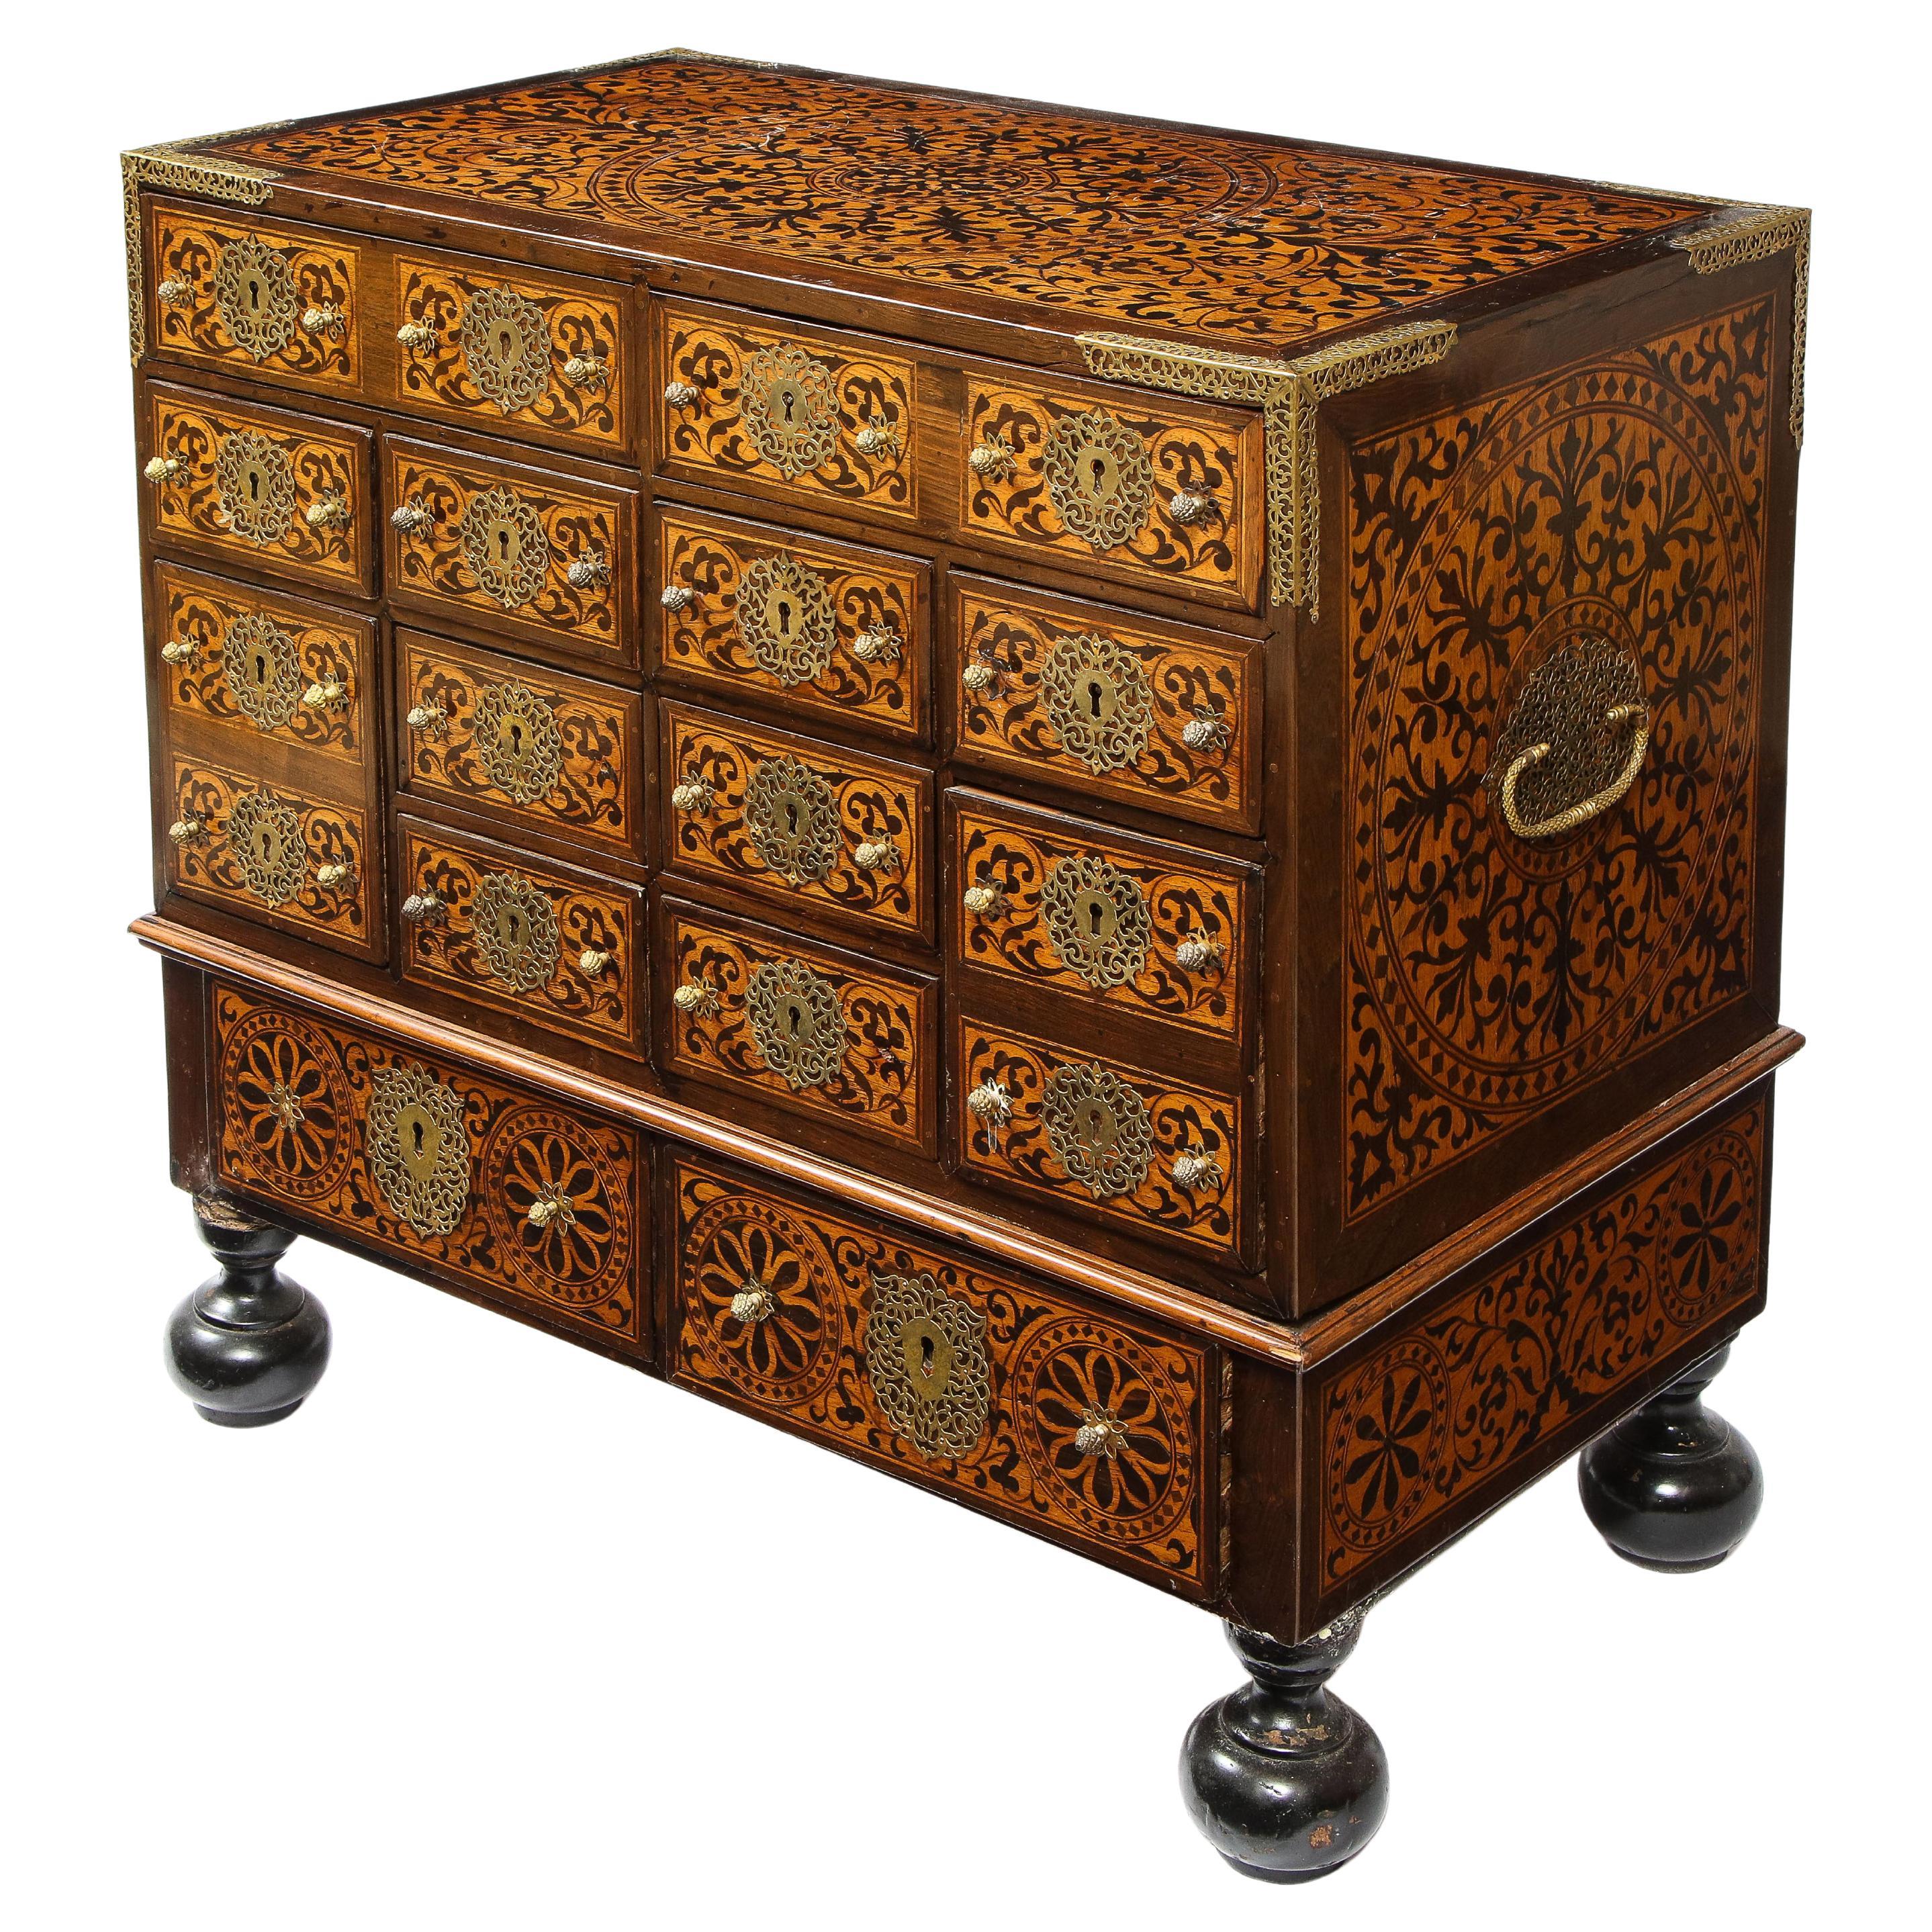 Indo-Portuguese Brass-Mounted Hardwood and Indian Wood Marquetry Cabinet For Sale